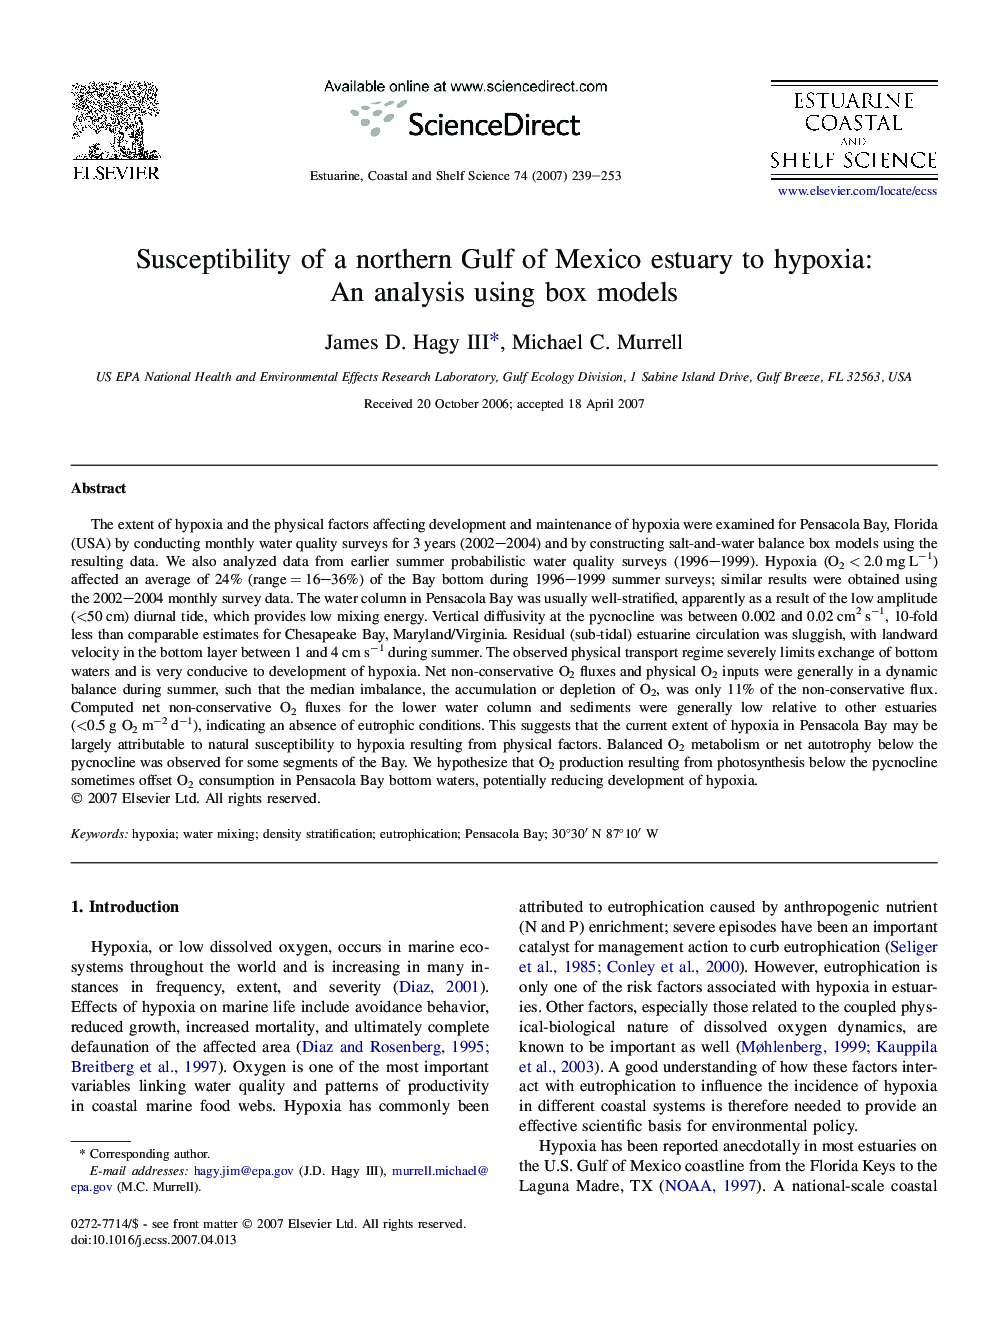 Susceptibility of a northern Gulf of Mexico estuary to hypoxia: An analysis using box models